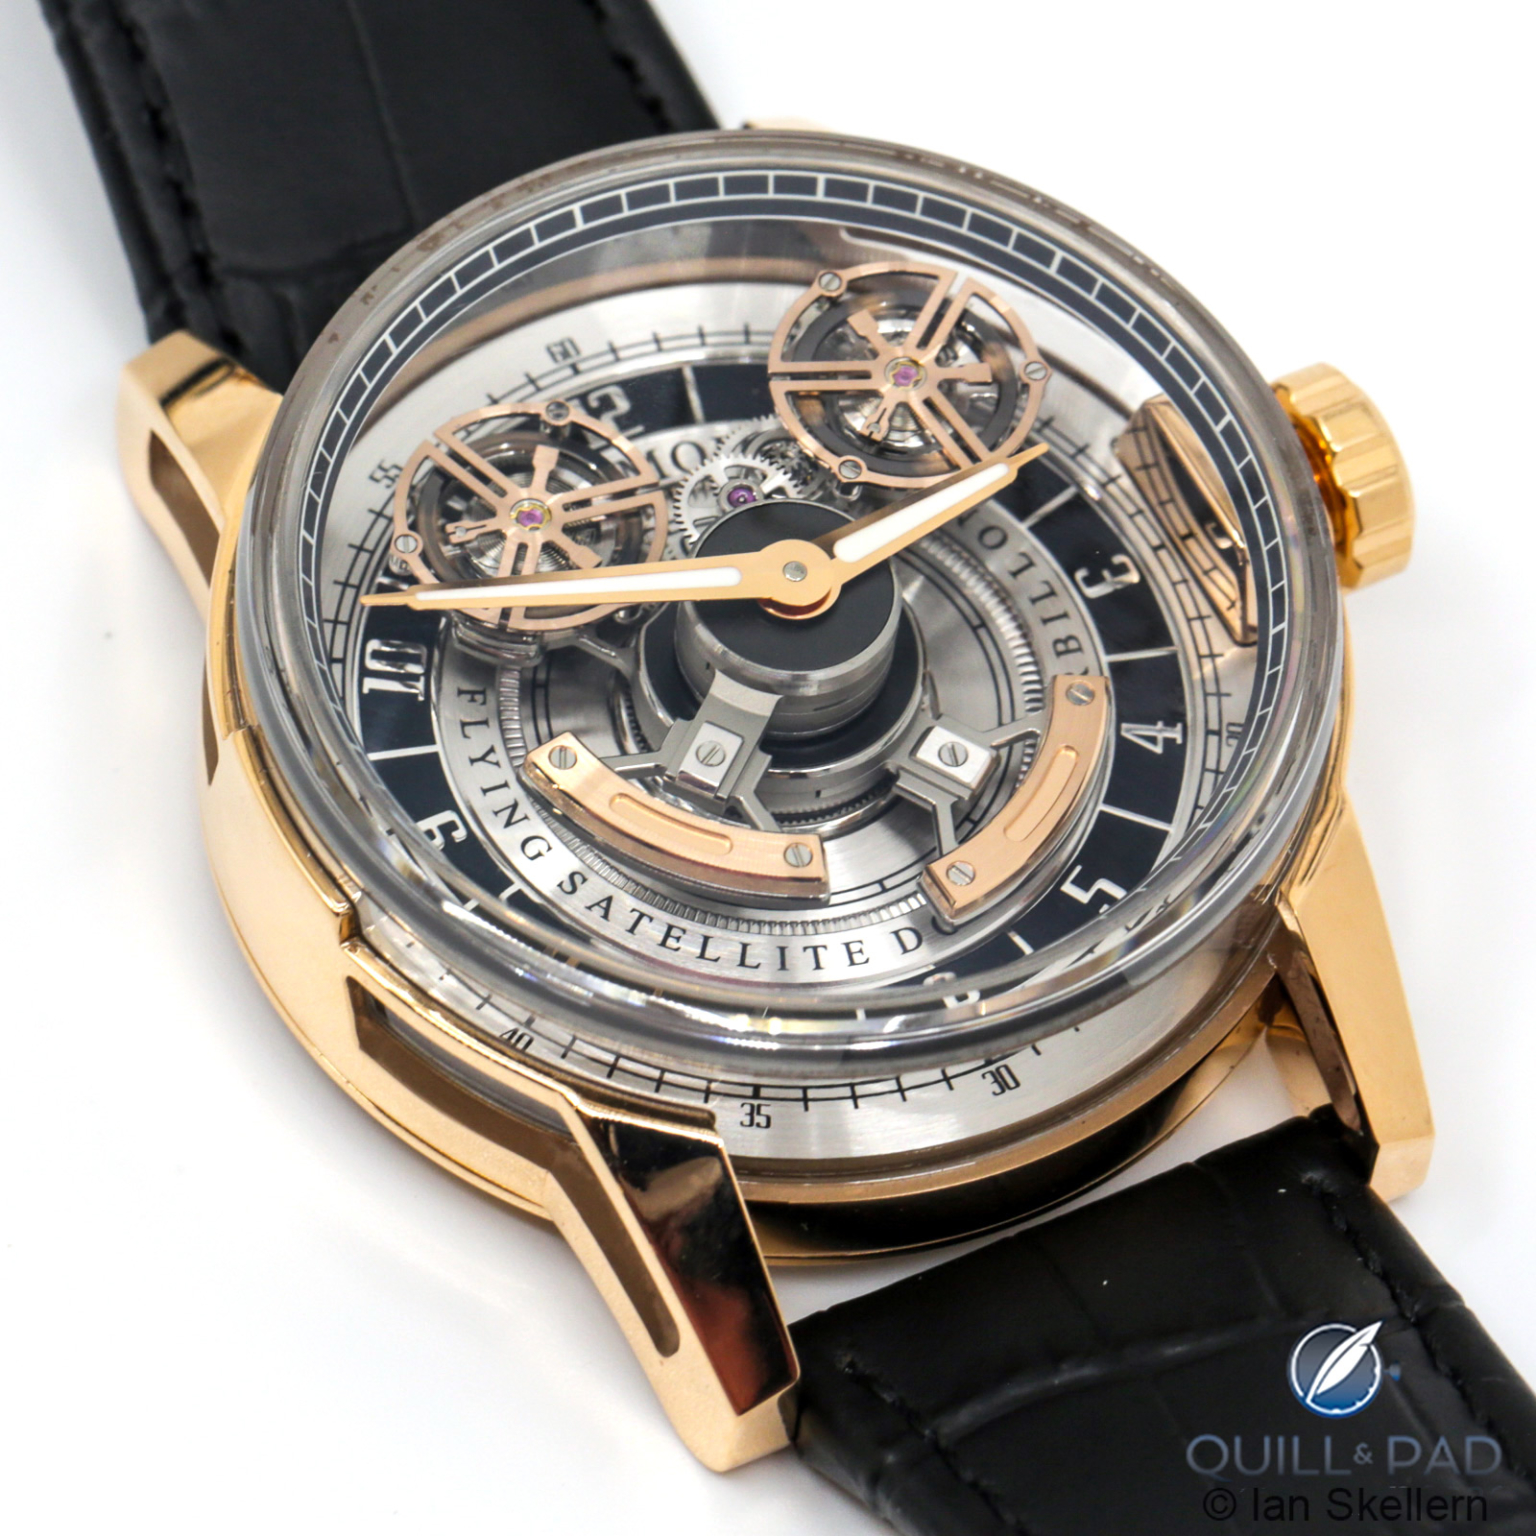 Louis Moinet Astronef: It’s Space, Jim, But Not As We Know It - Quill & Pad